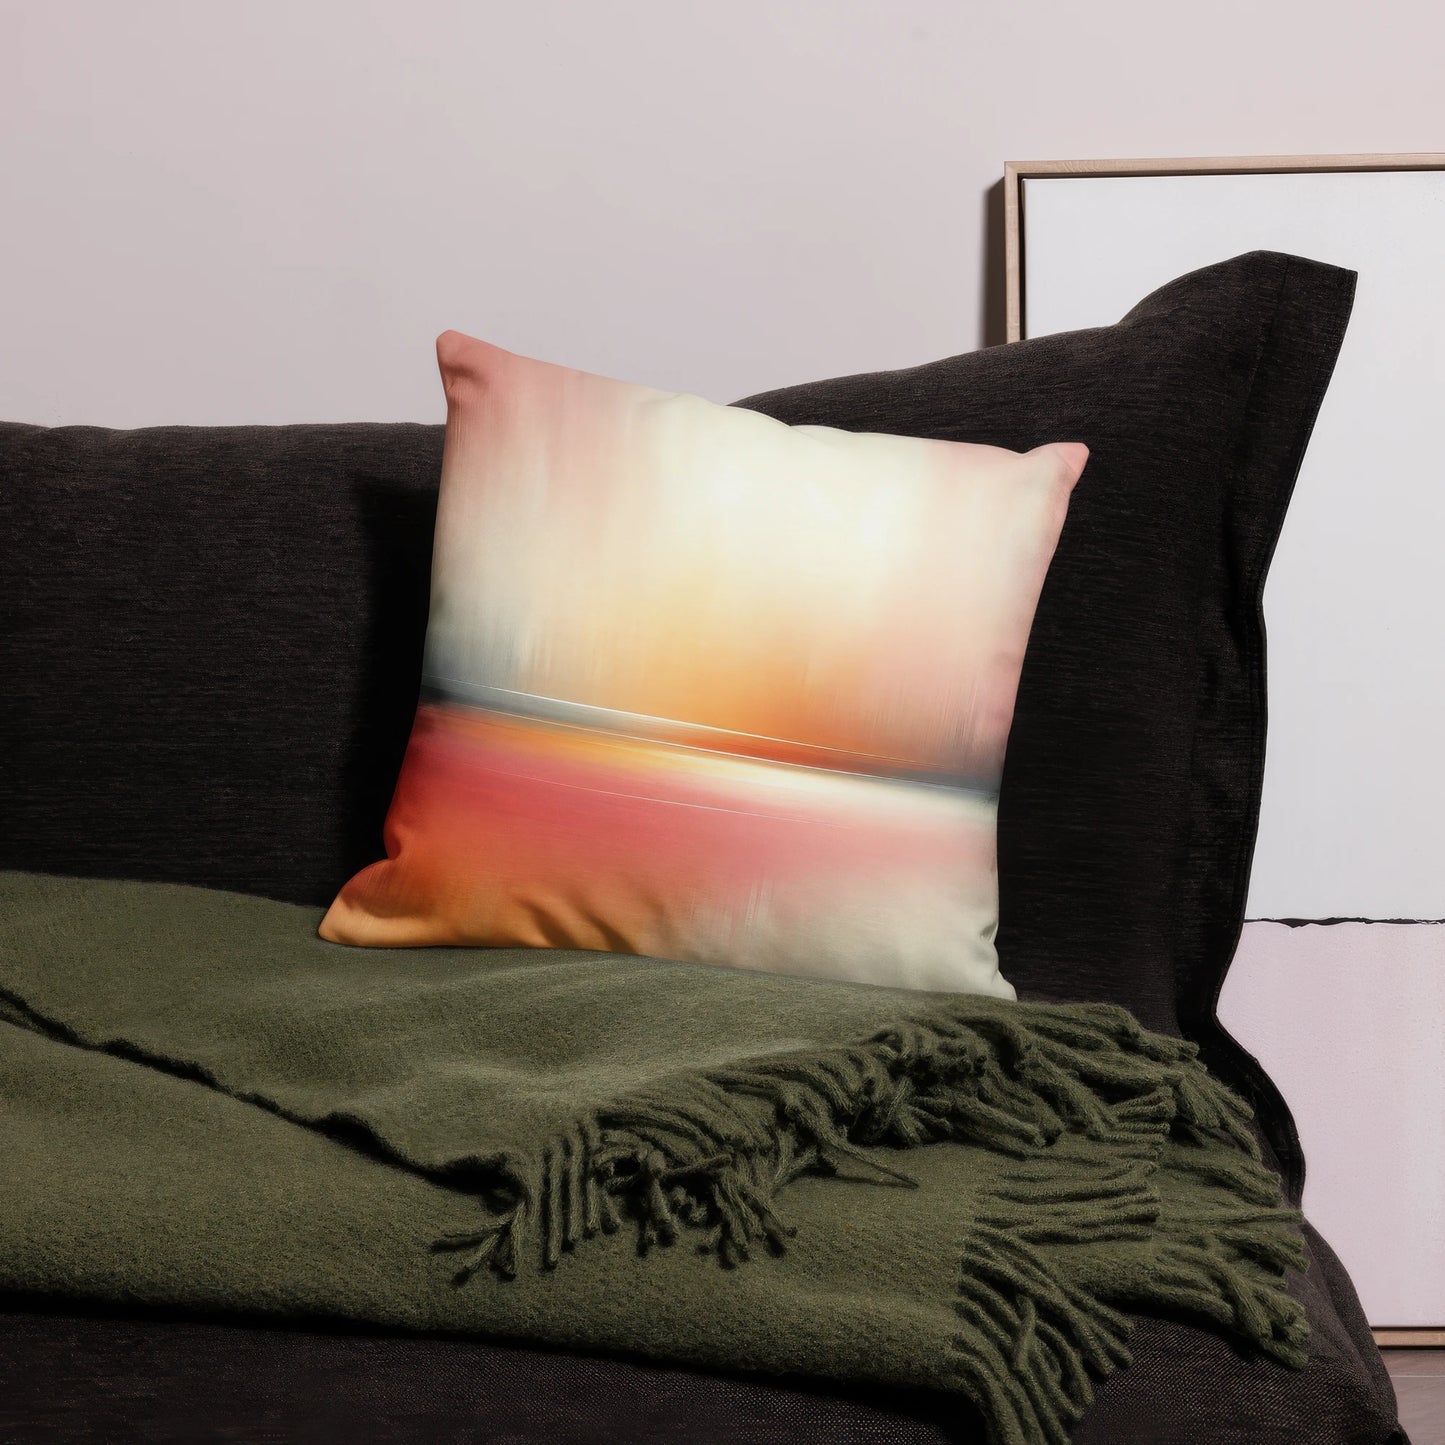 Abstract Art Pillow: The Serenity of Now